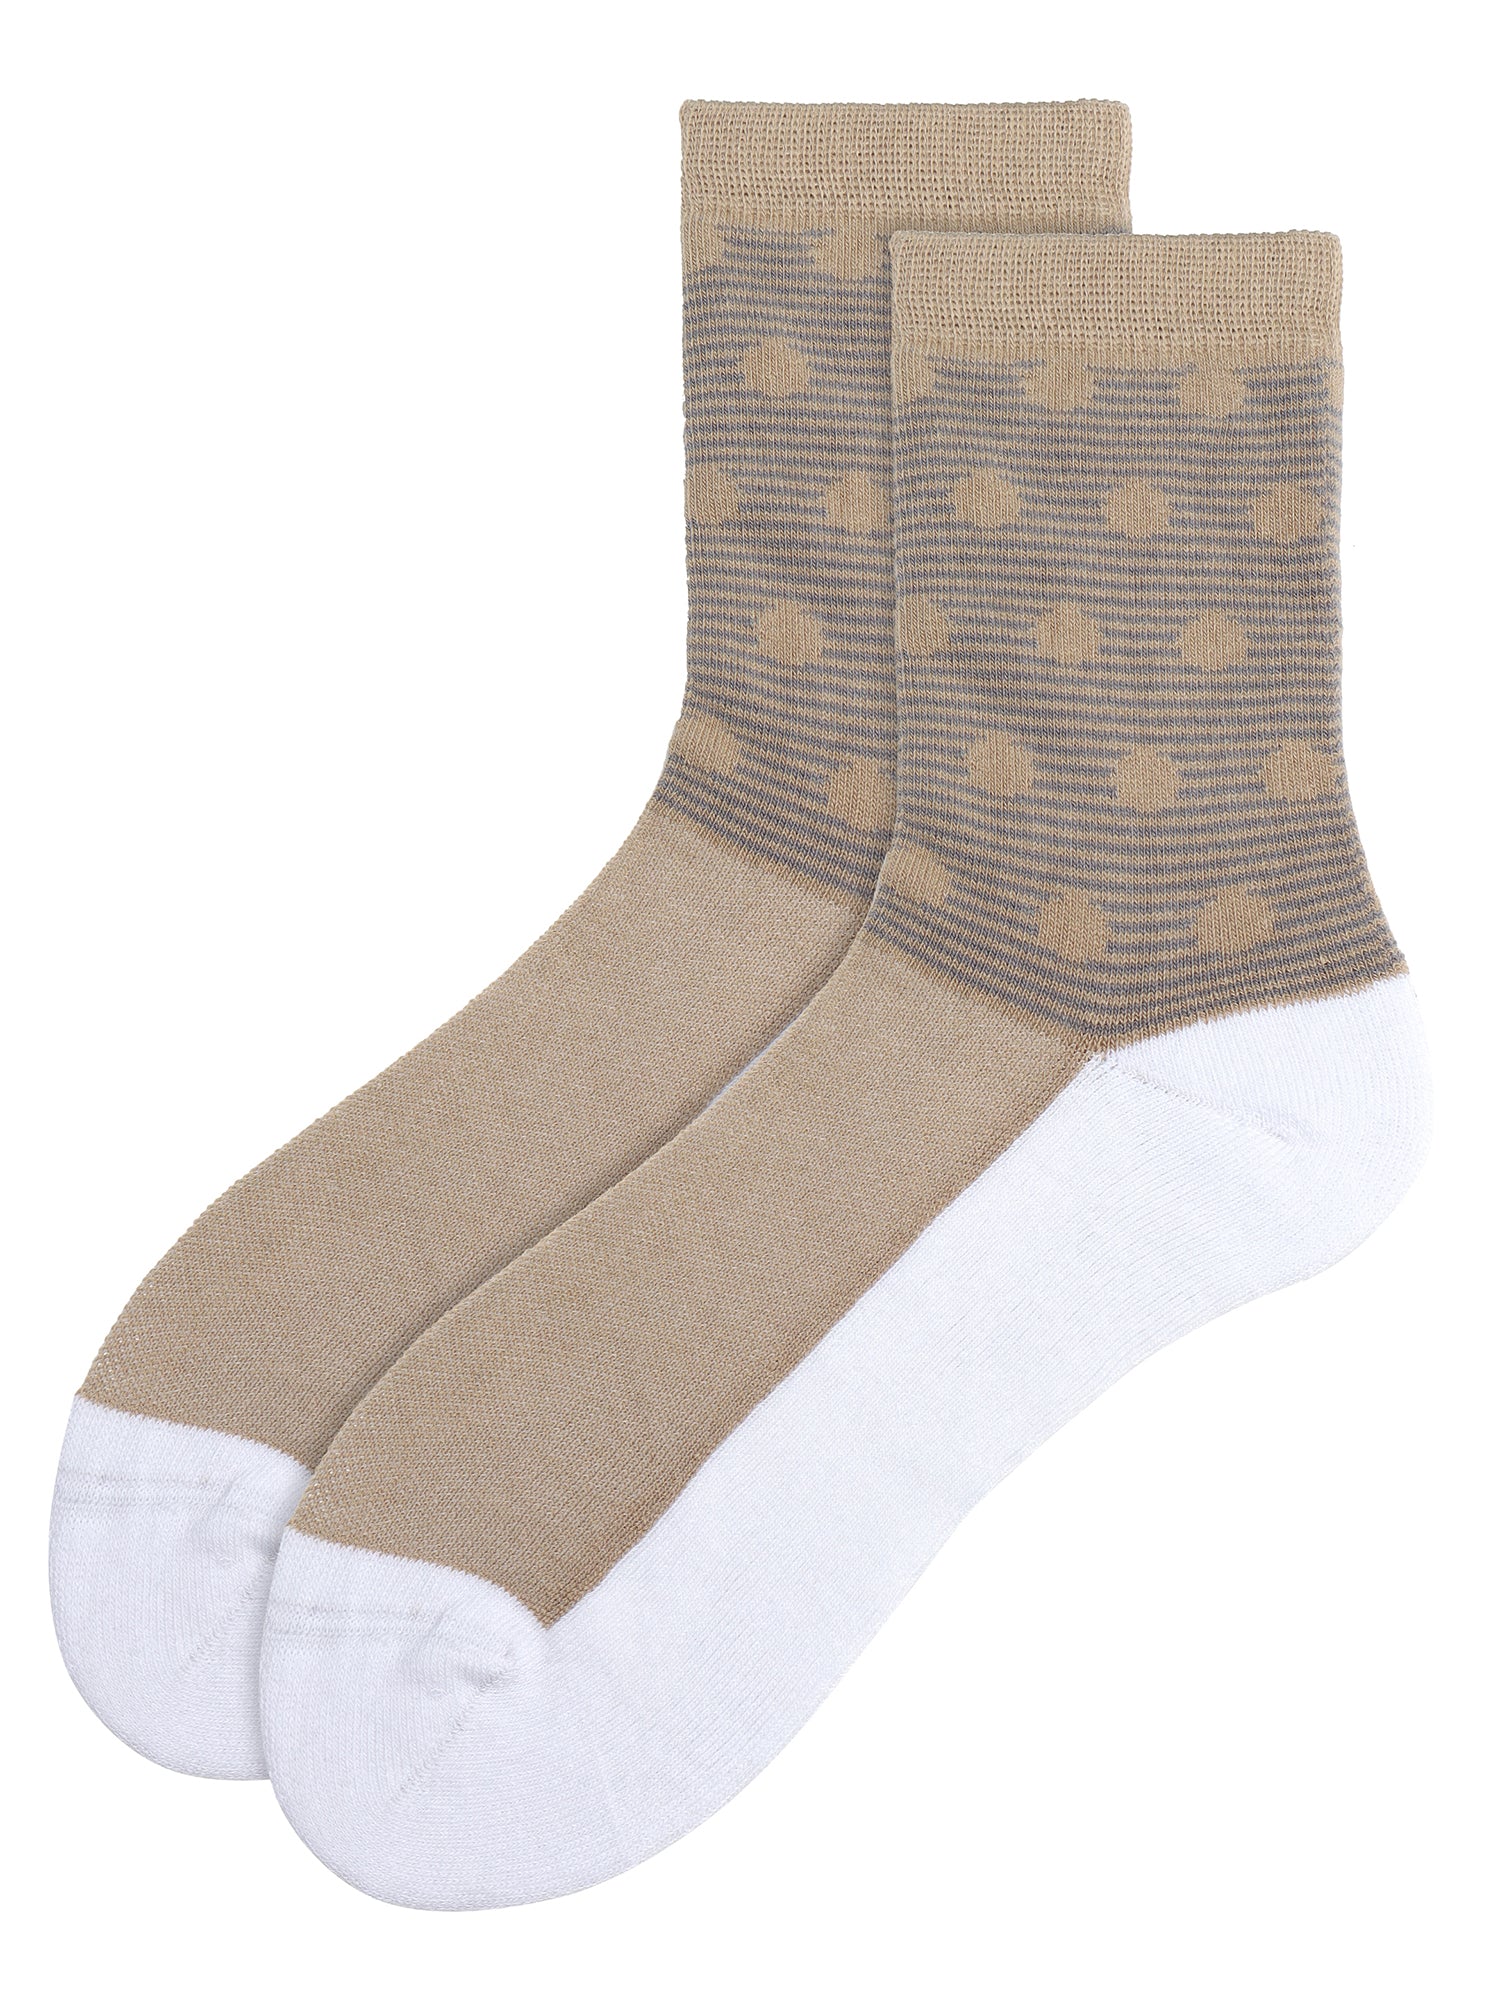 Diabetic Care | Stand Out Box Of 4 Pairs | Mid Calf Crew Socks